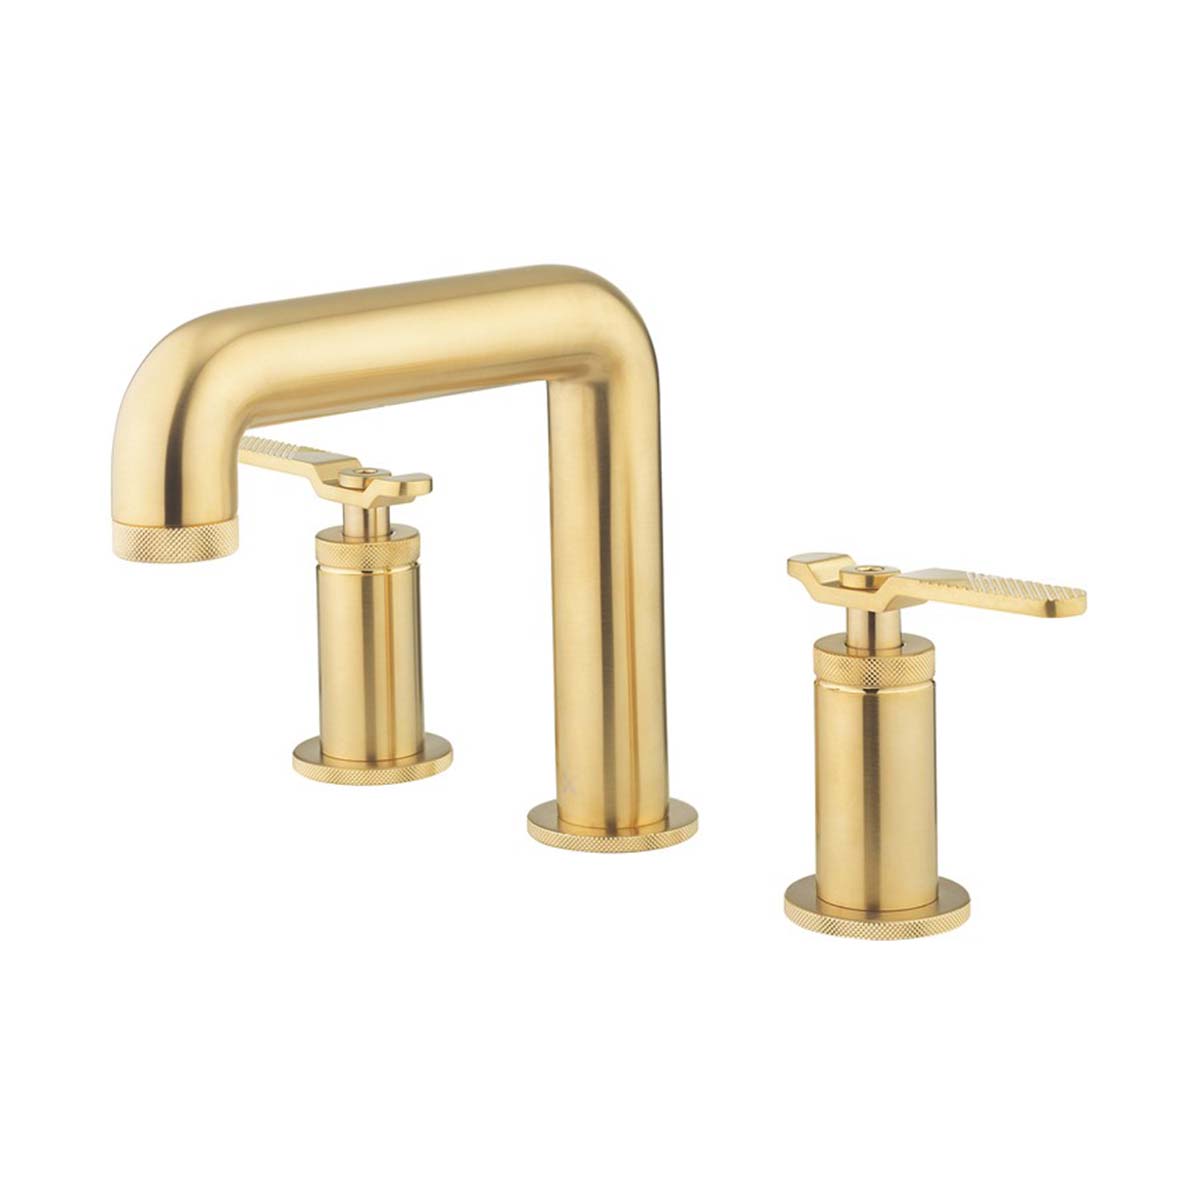 Crosswater Union 3 Hole Basin Mixer Tap With Lever Handles Union Brass